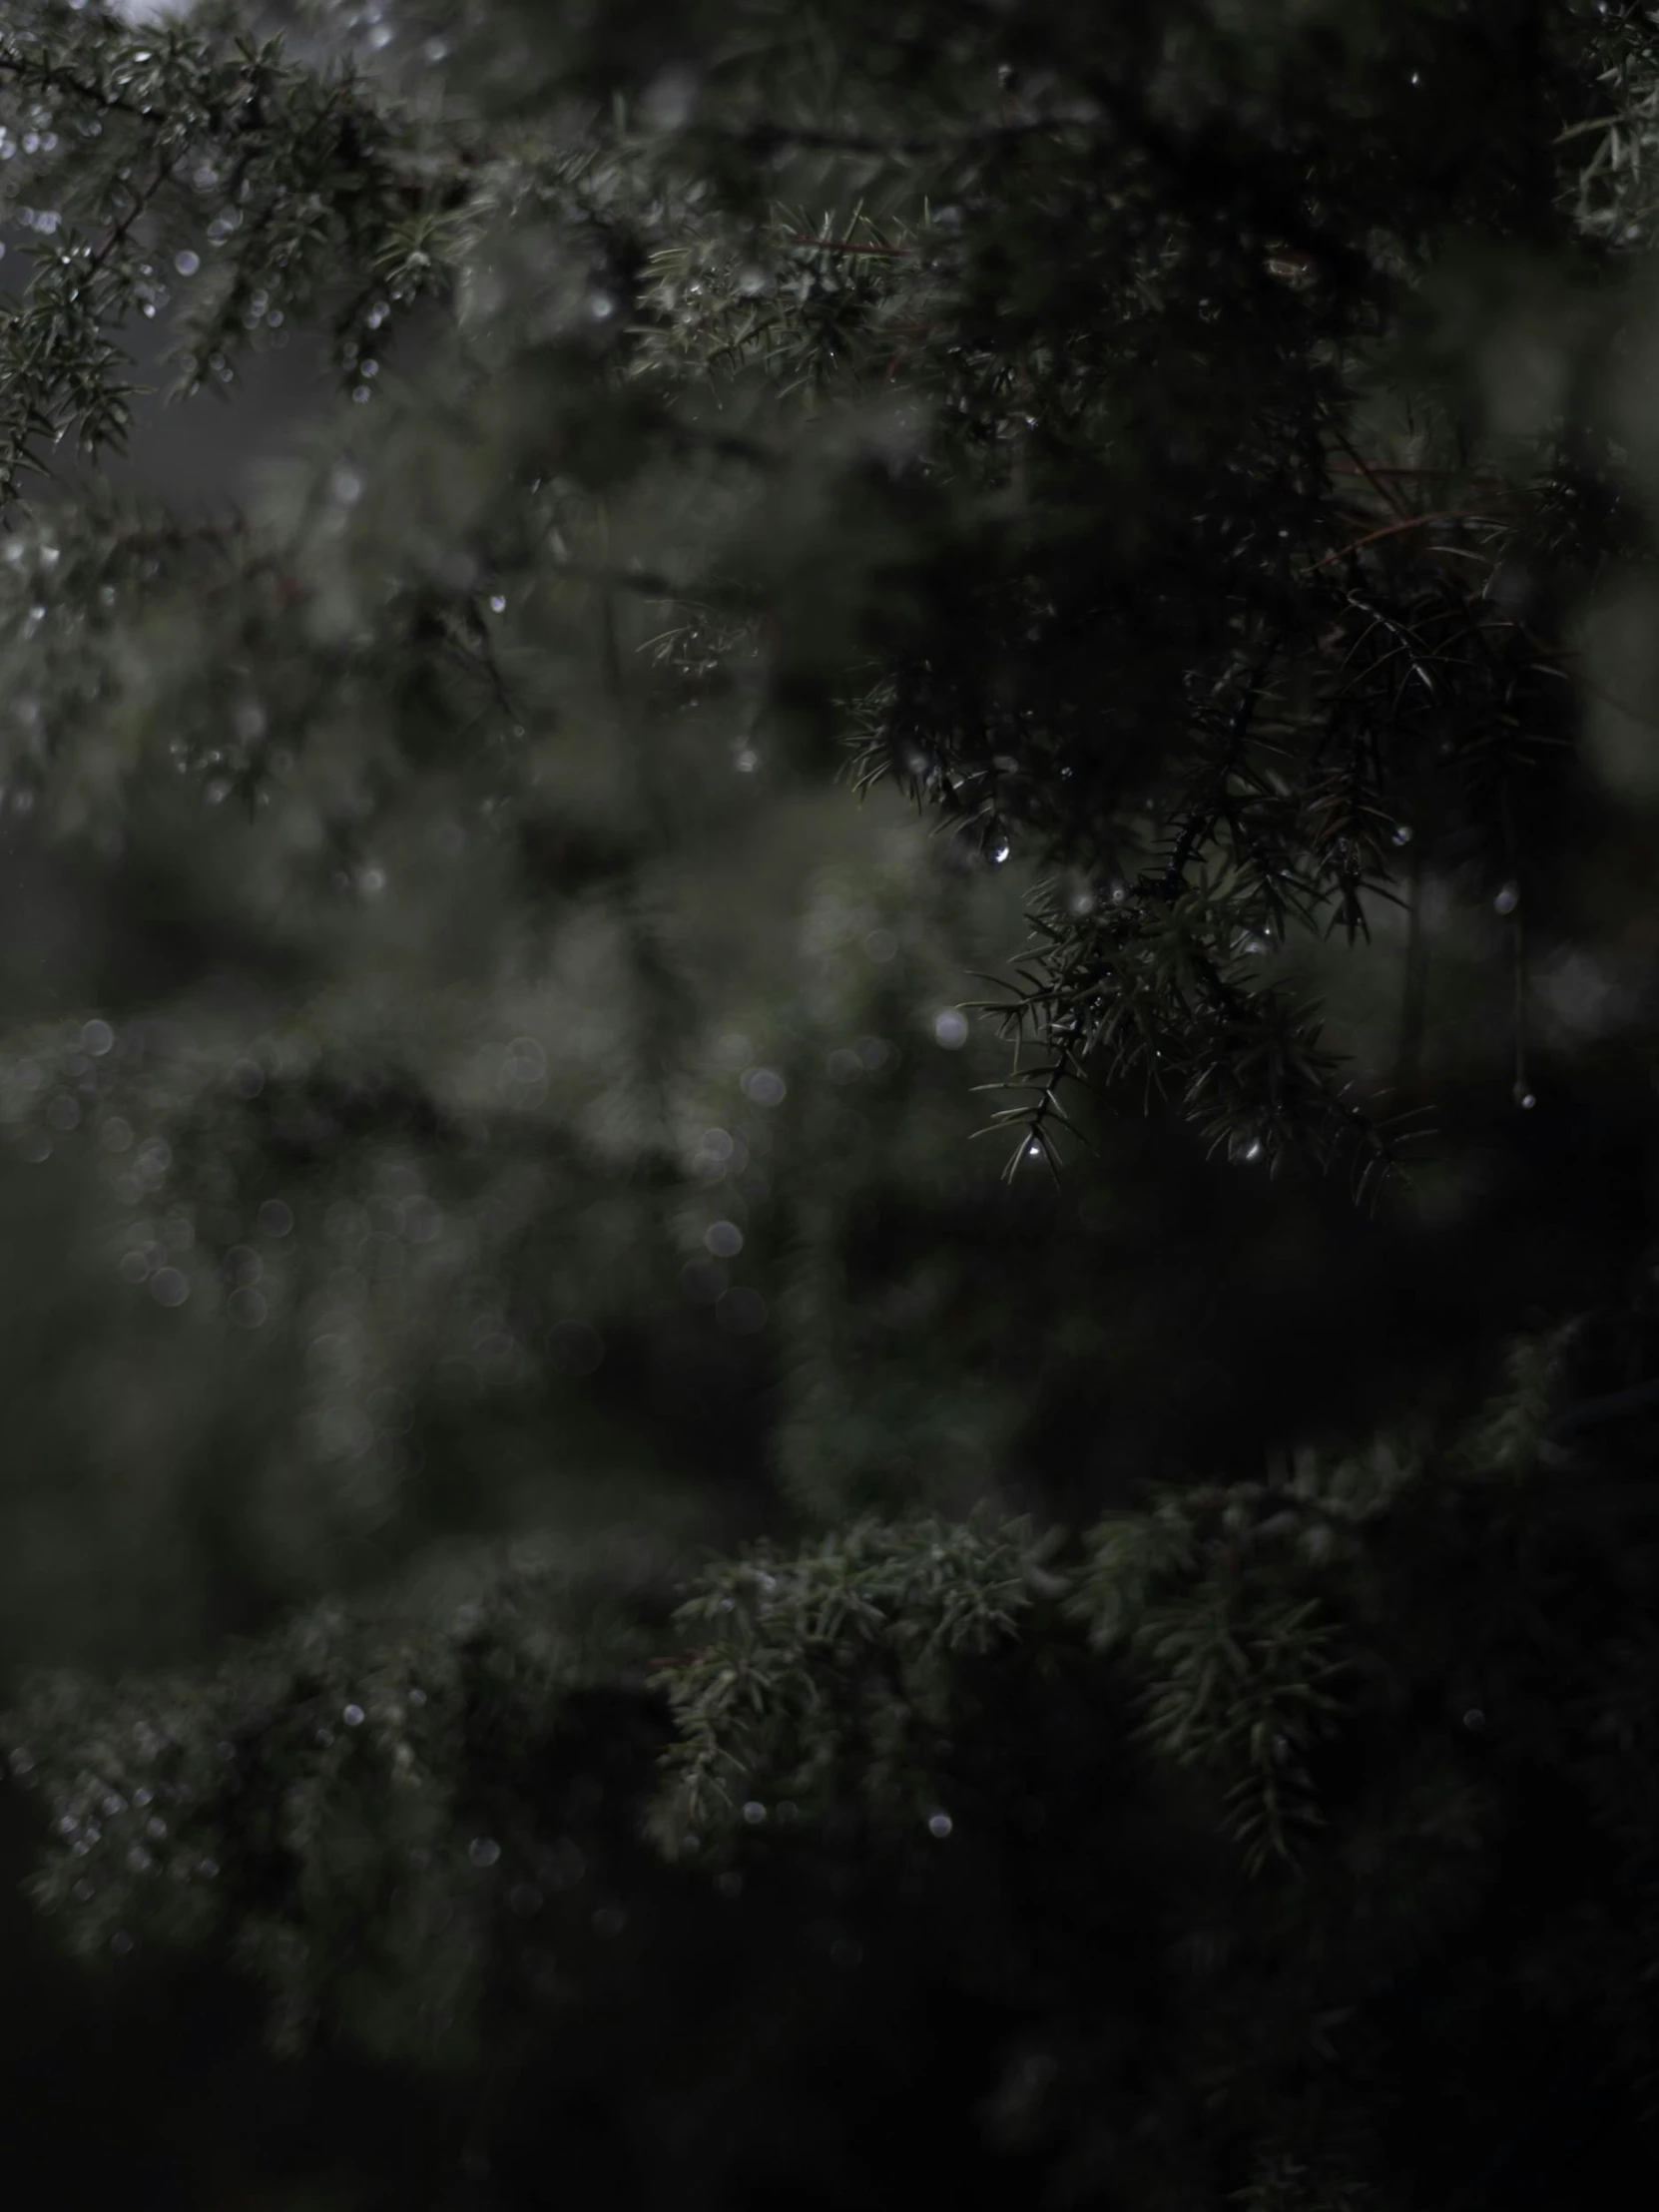 a man riding a snowboard down a snow covered slope, inspired by Elsa Bleda, dark pine trees, raining! nighttime, rain aesthetic, water droplets on lens